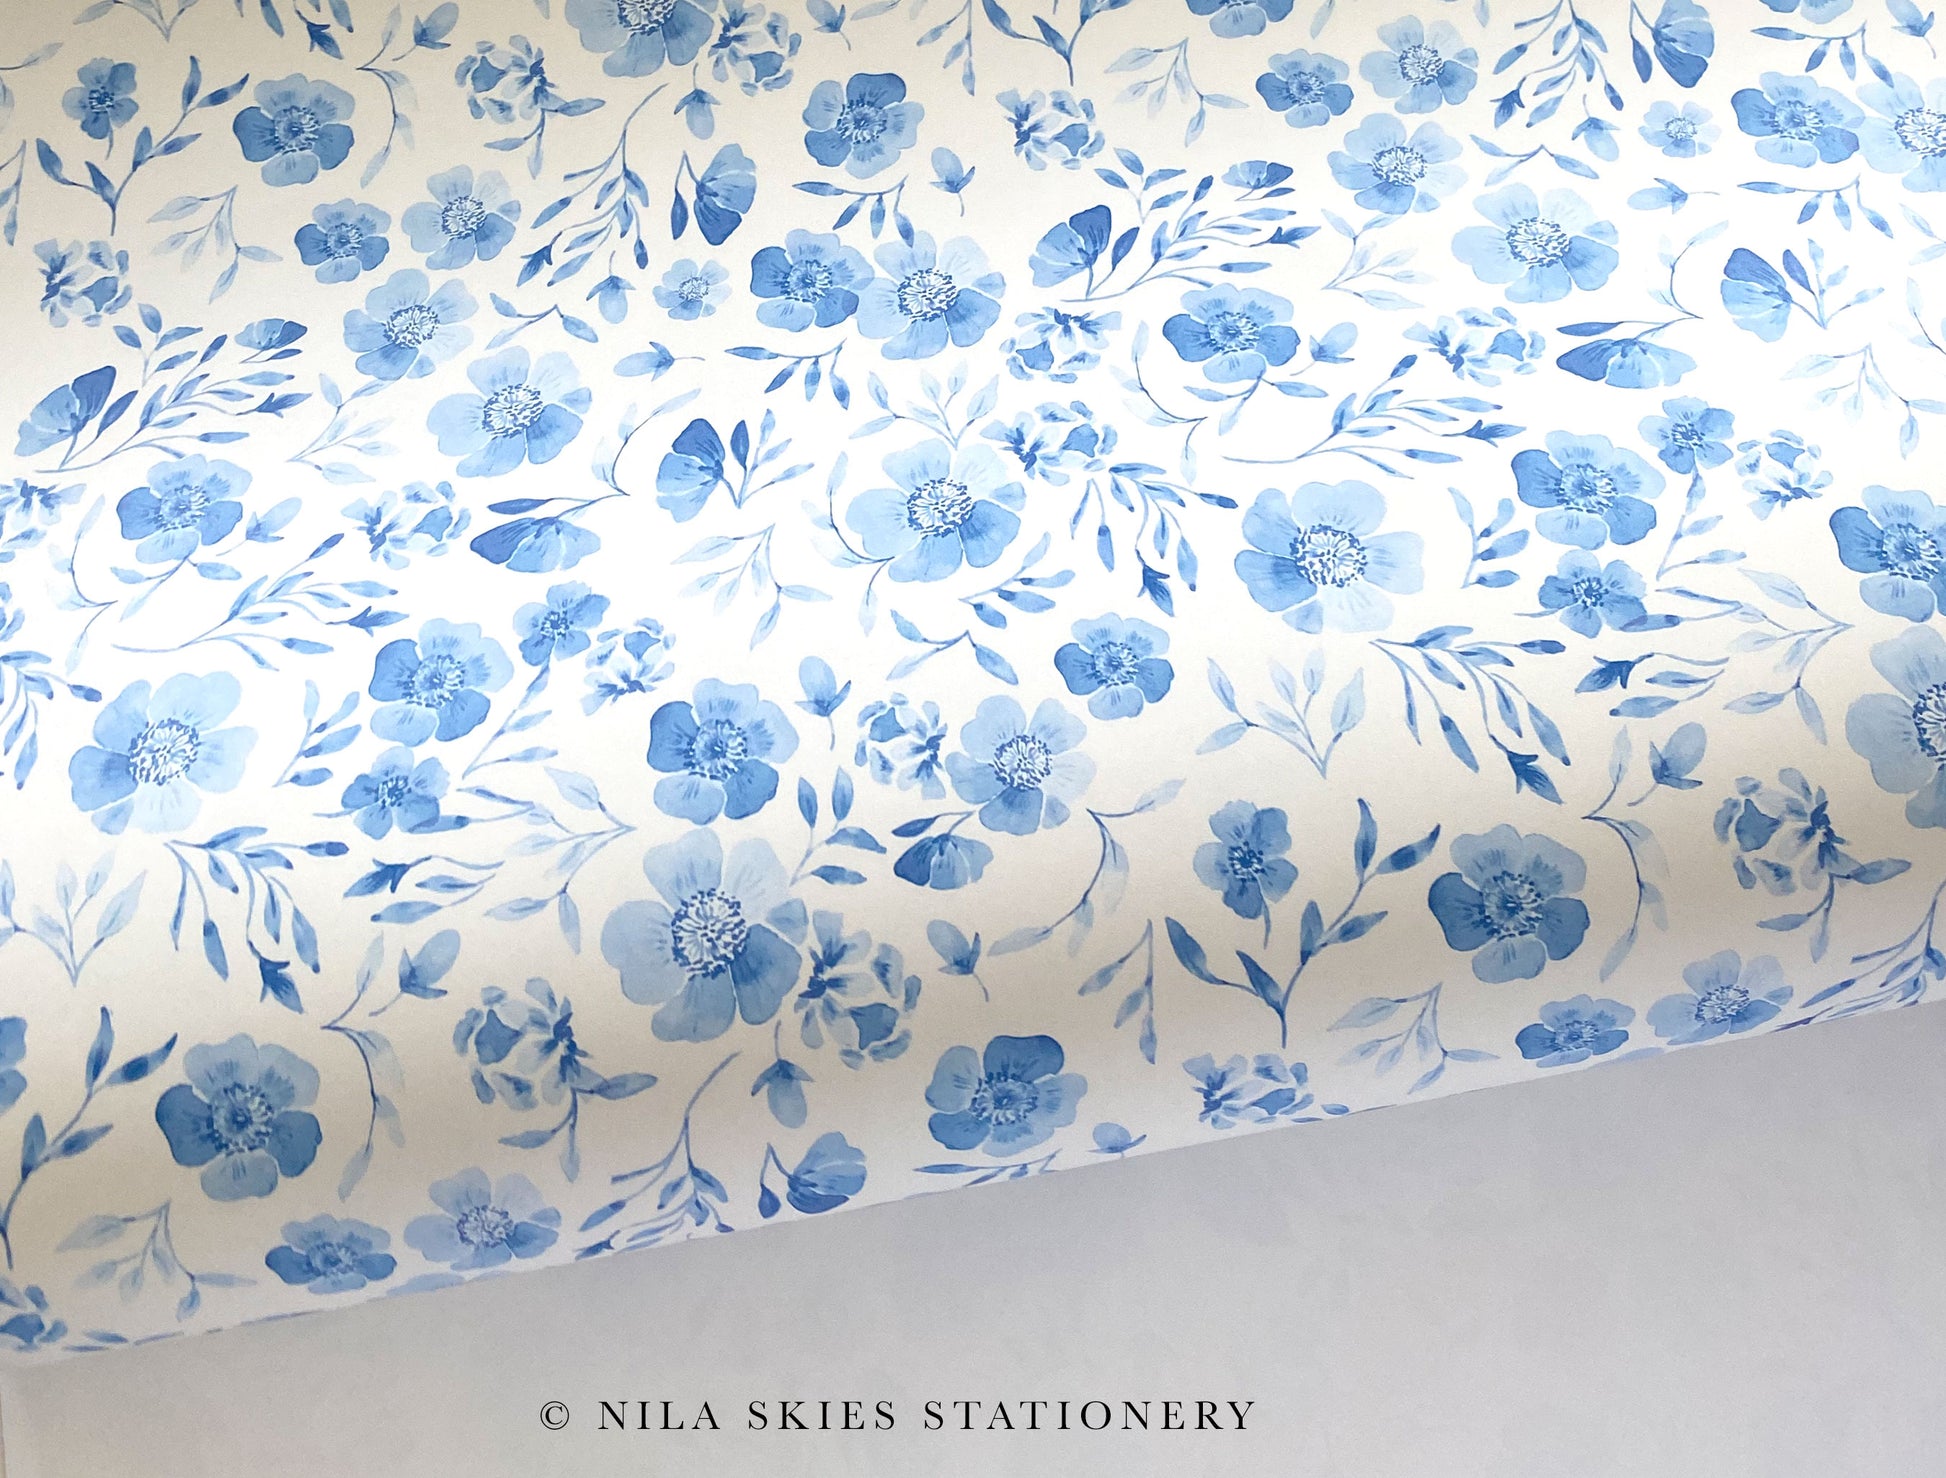 Sky Blue Floral Wrapping Paper High Quality Wrapping Paper Eco-friendly  Matte Finish Gift Wrap Multiple Sizes 